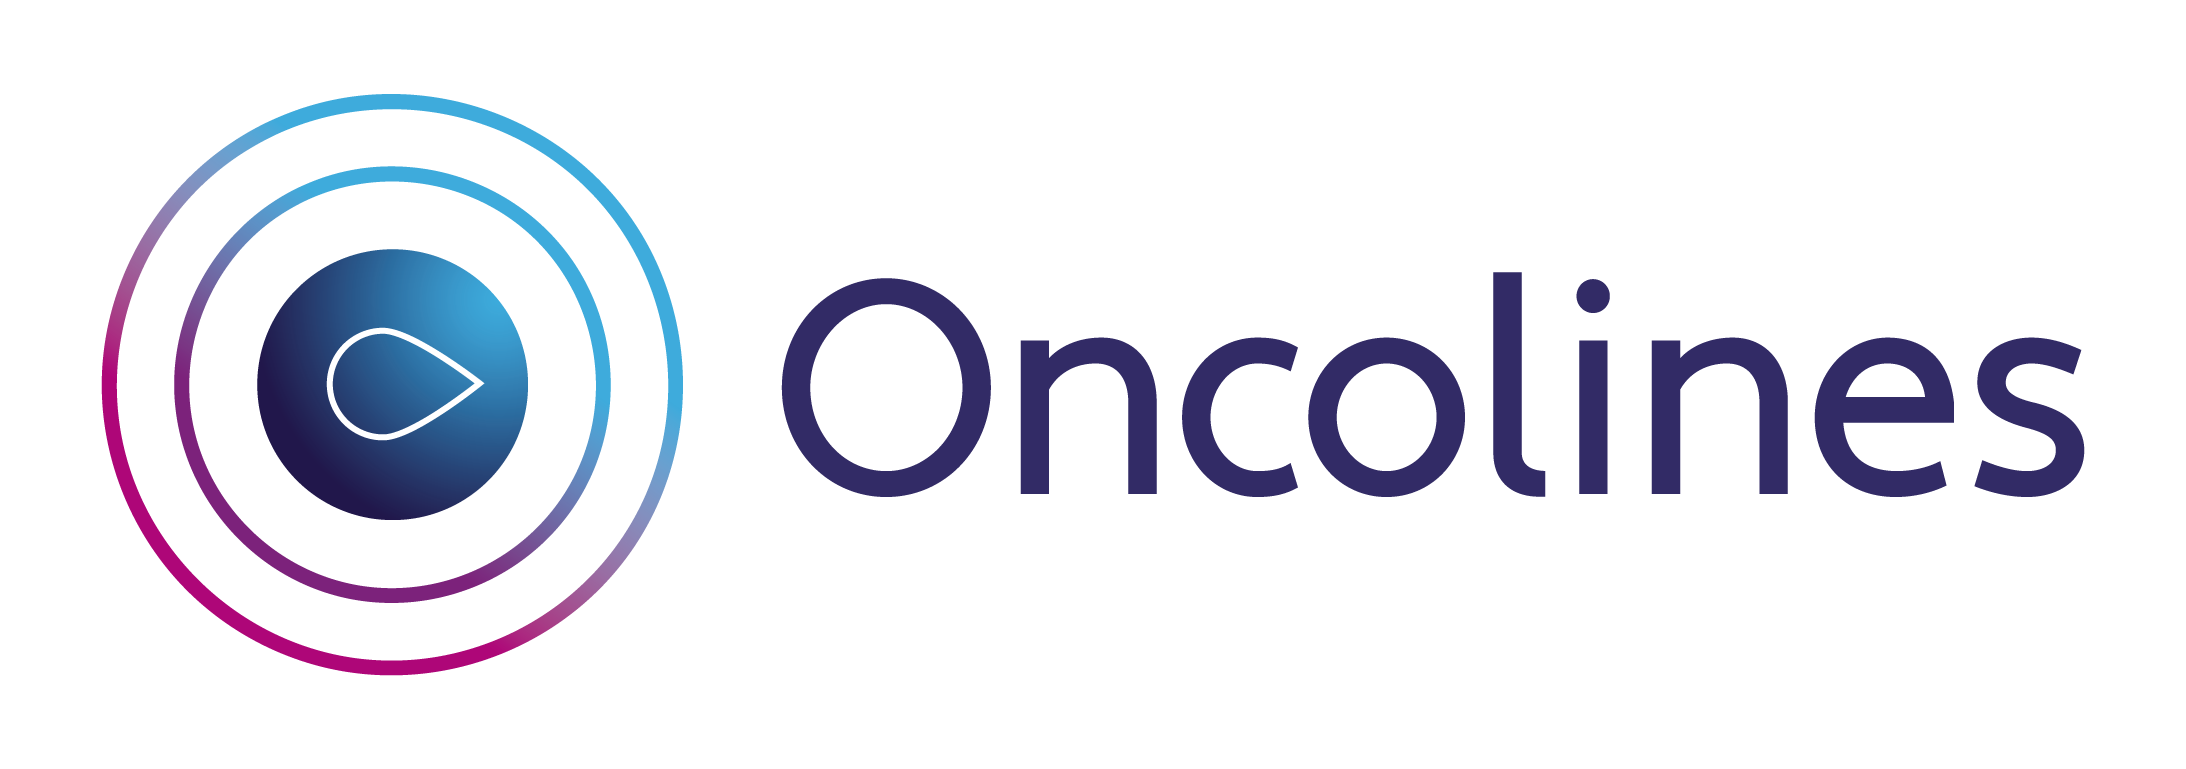 Oncolines logo 2021